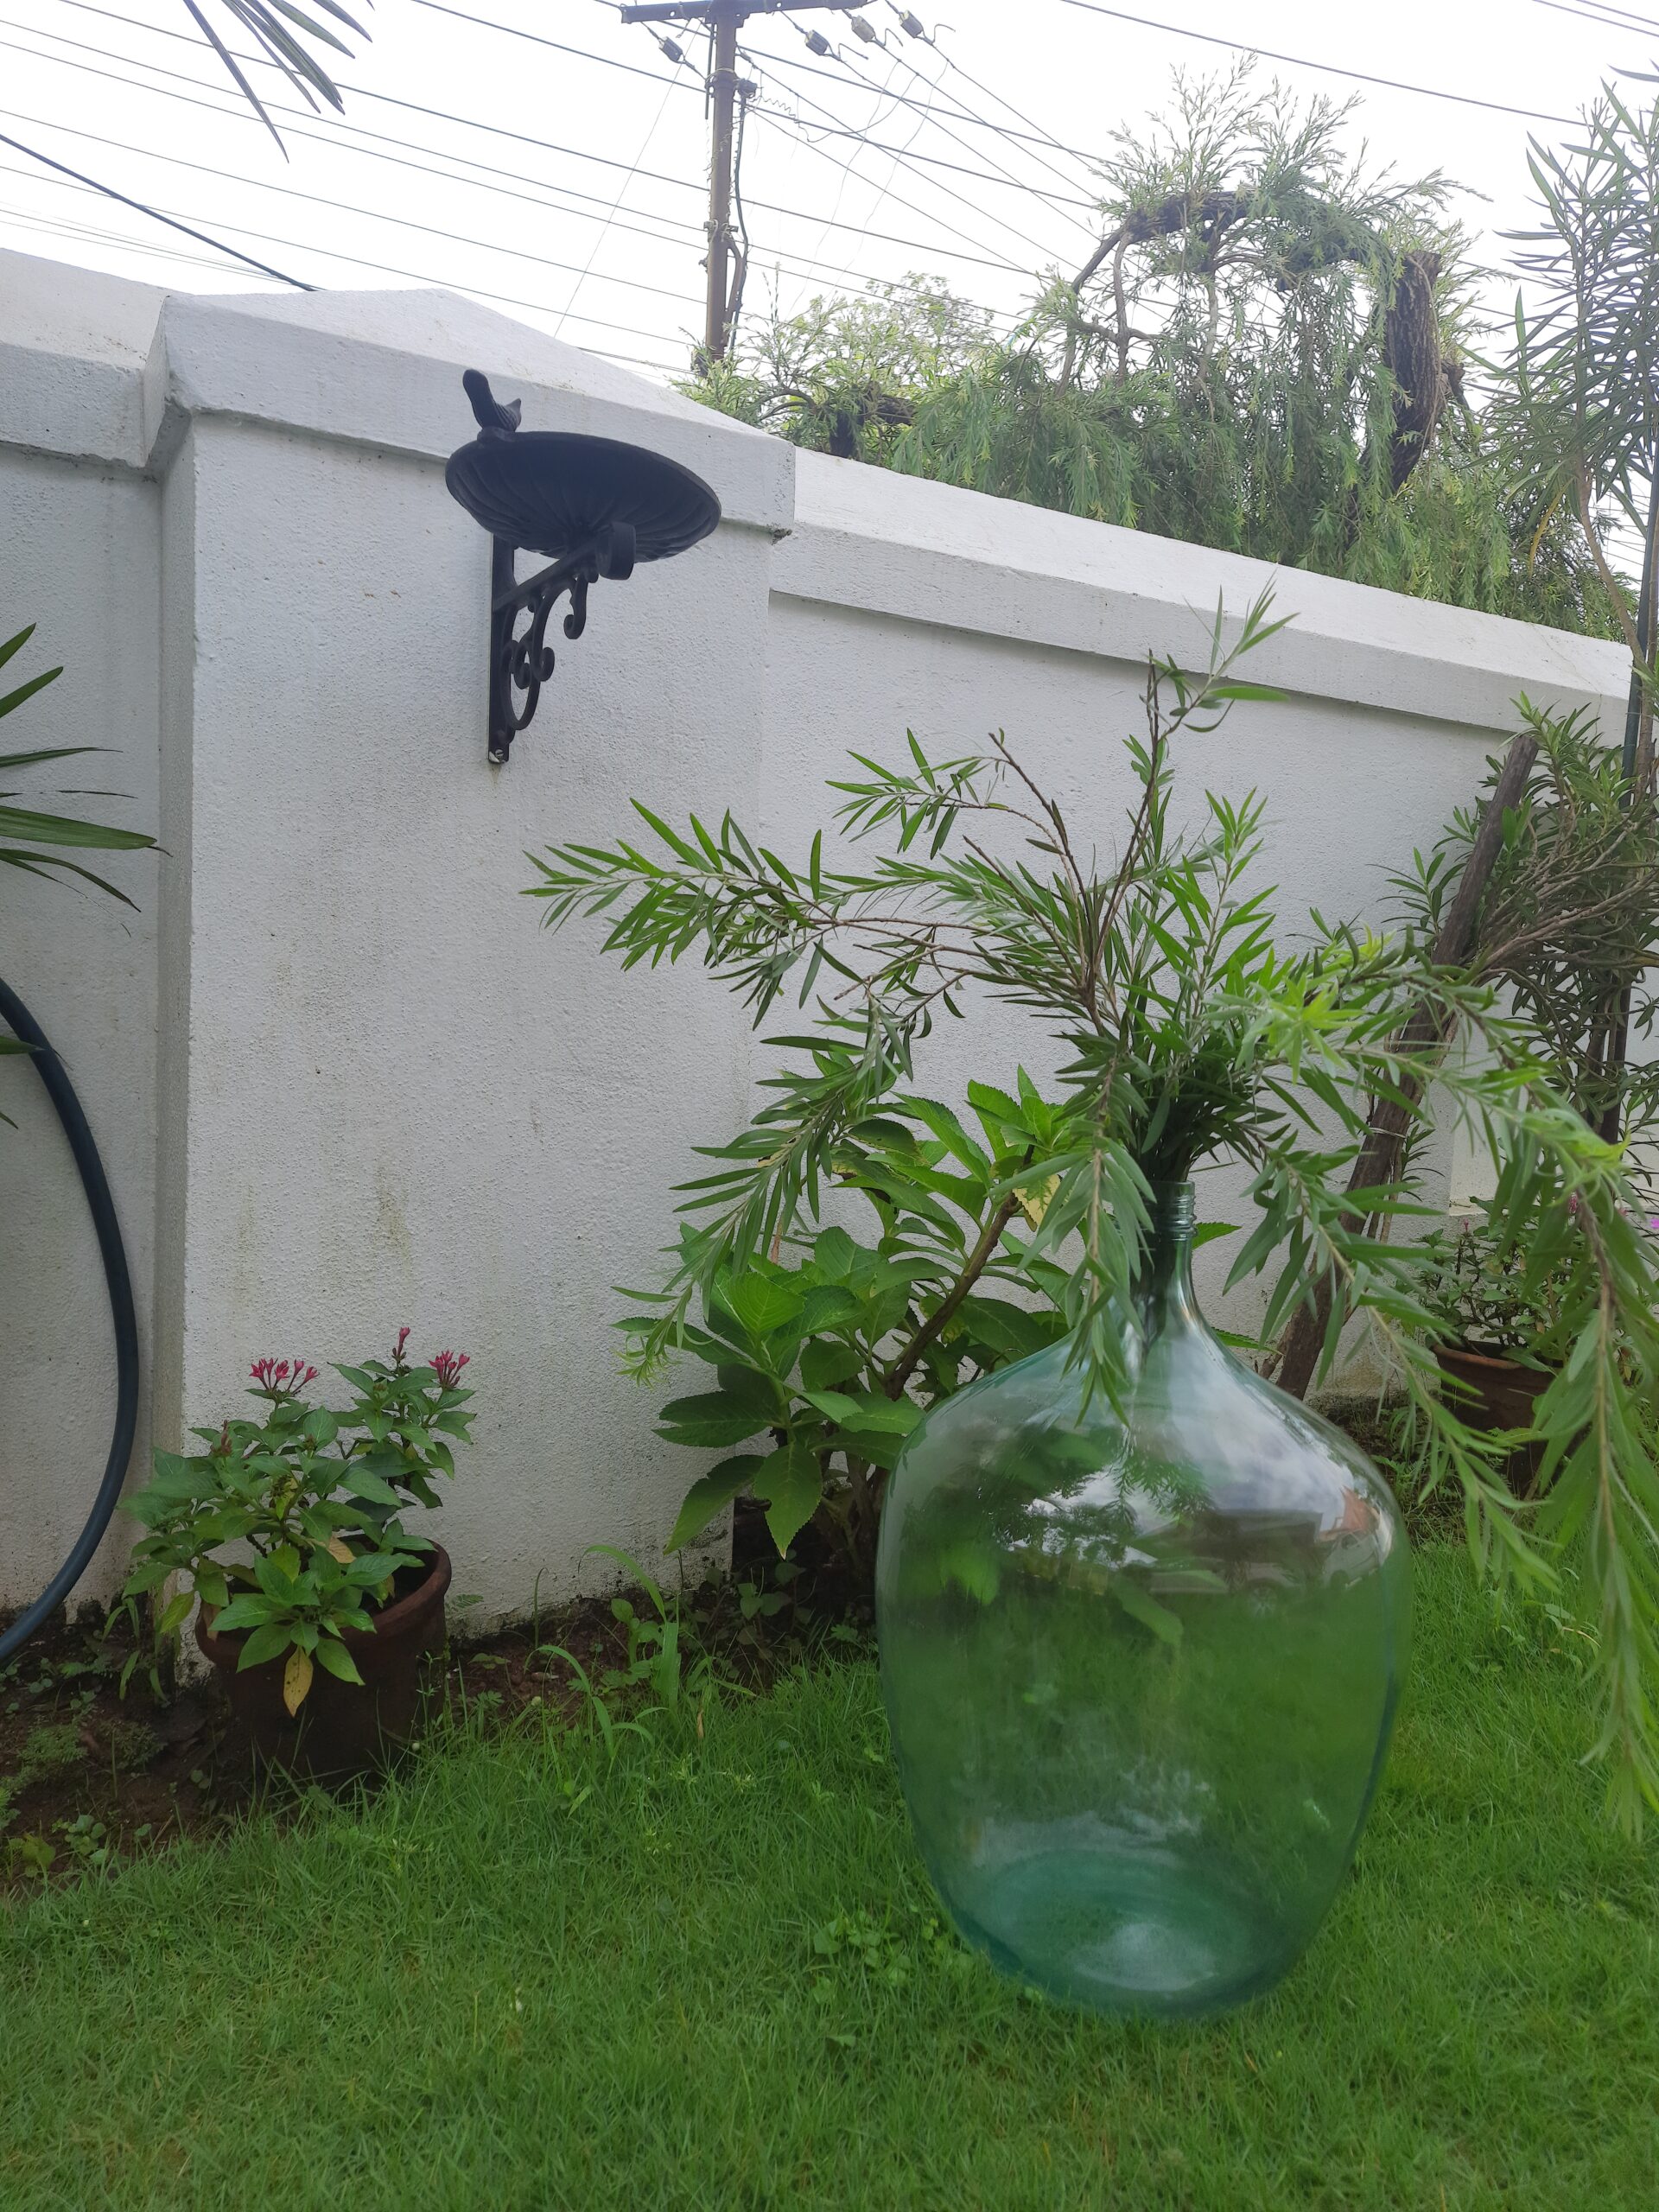 Demijohns in Indian Decor | Vintage demijohn with green plants in a garden